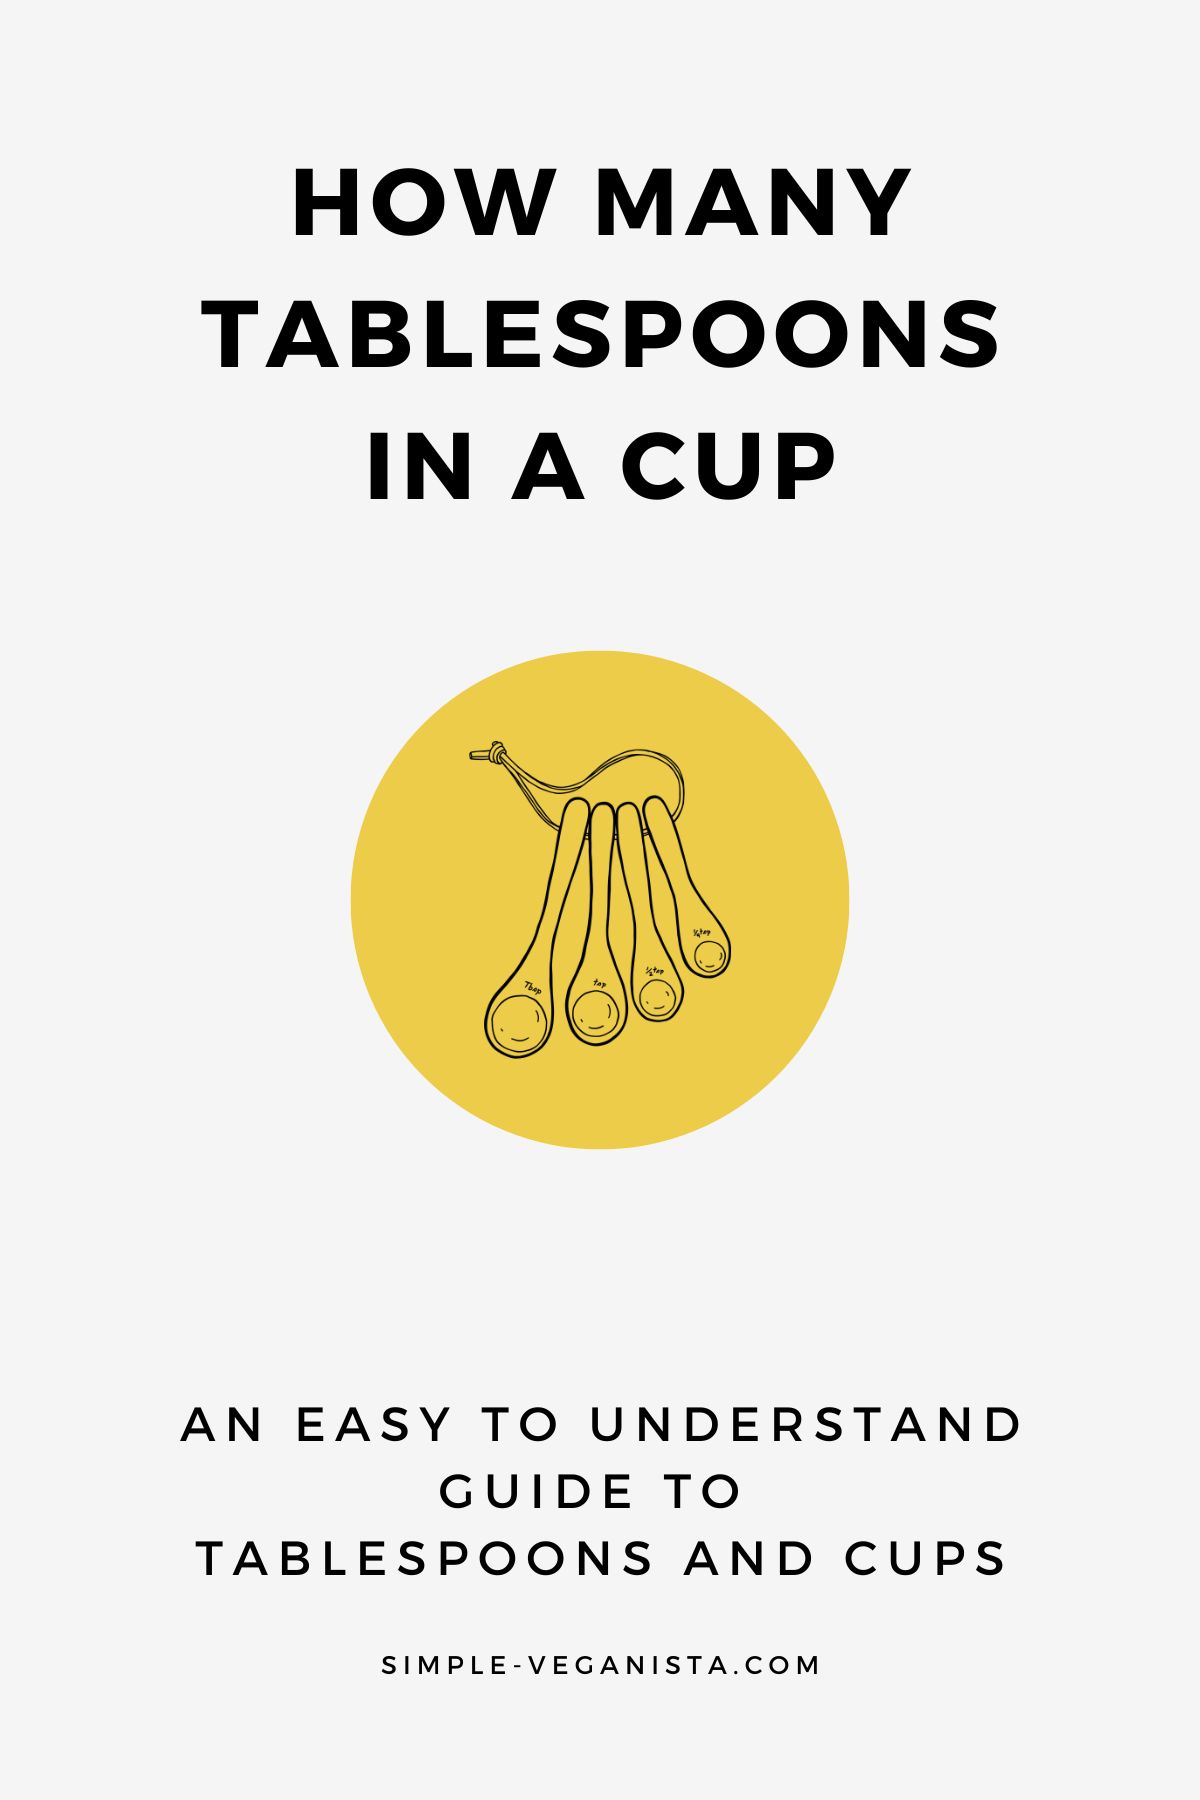 tablespoons in a cup intro graphic.